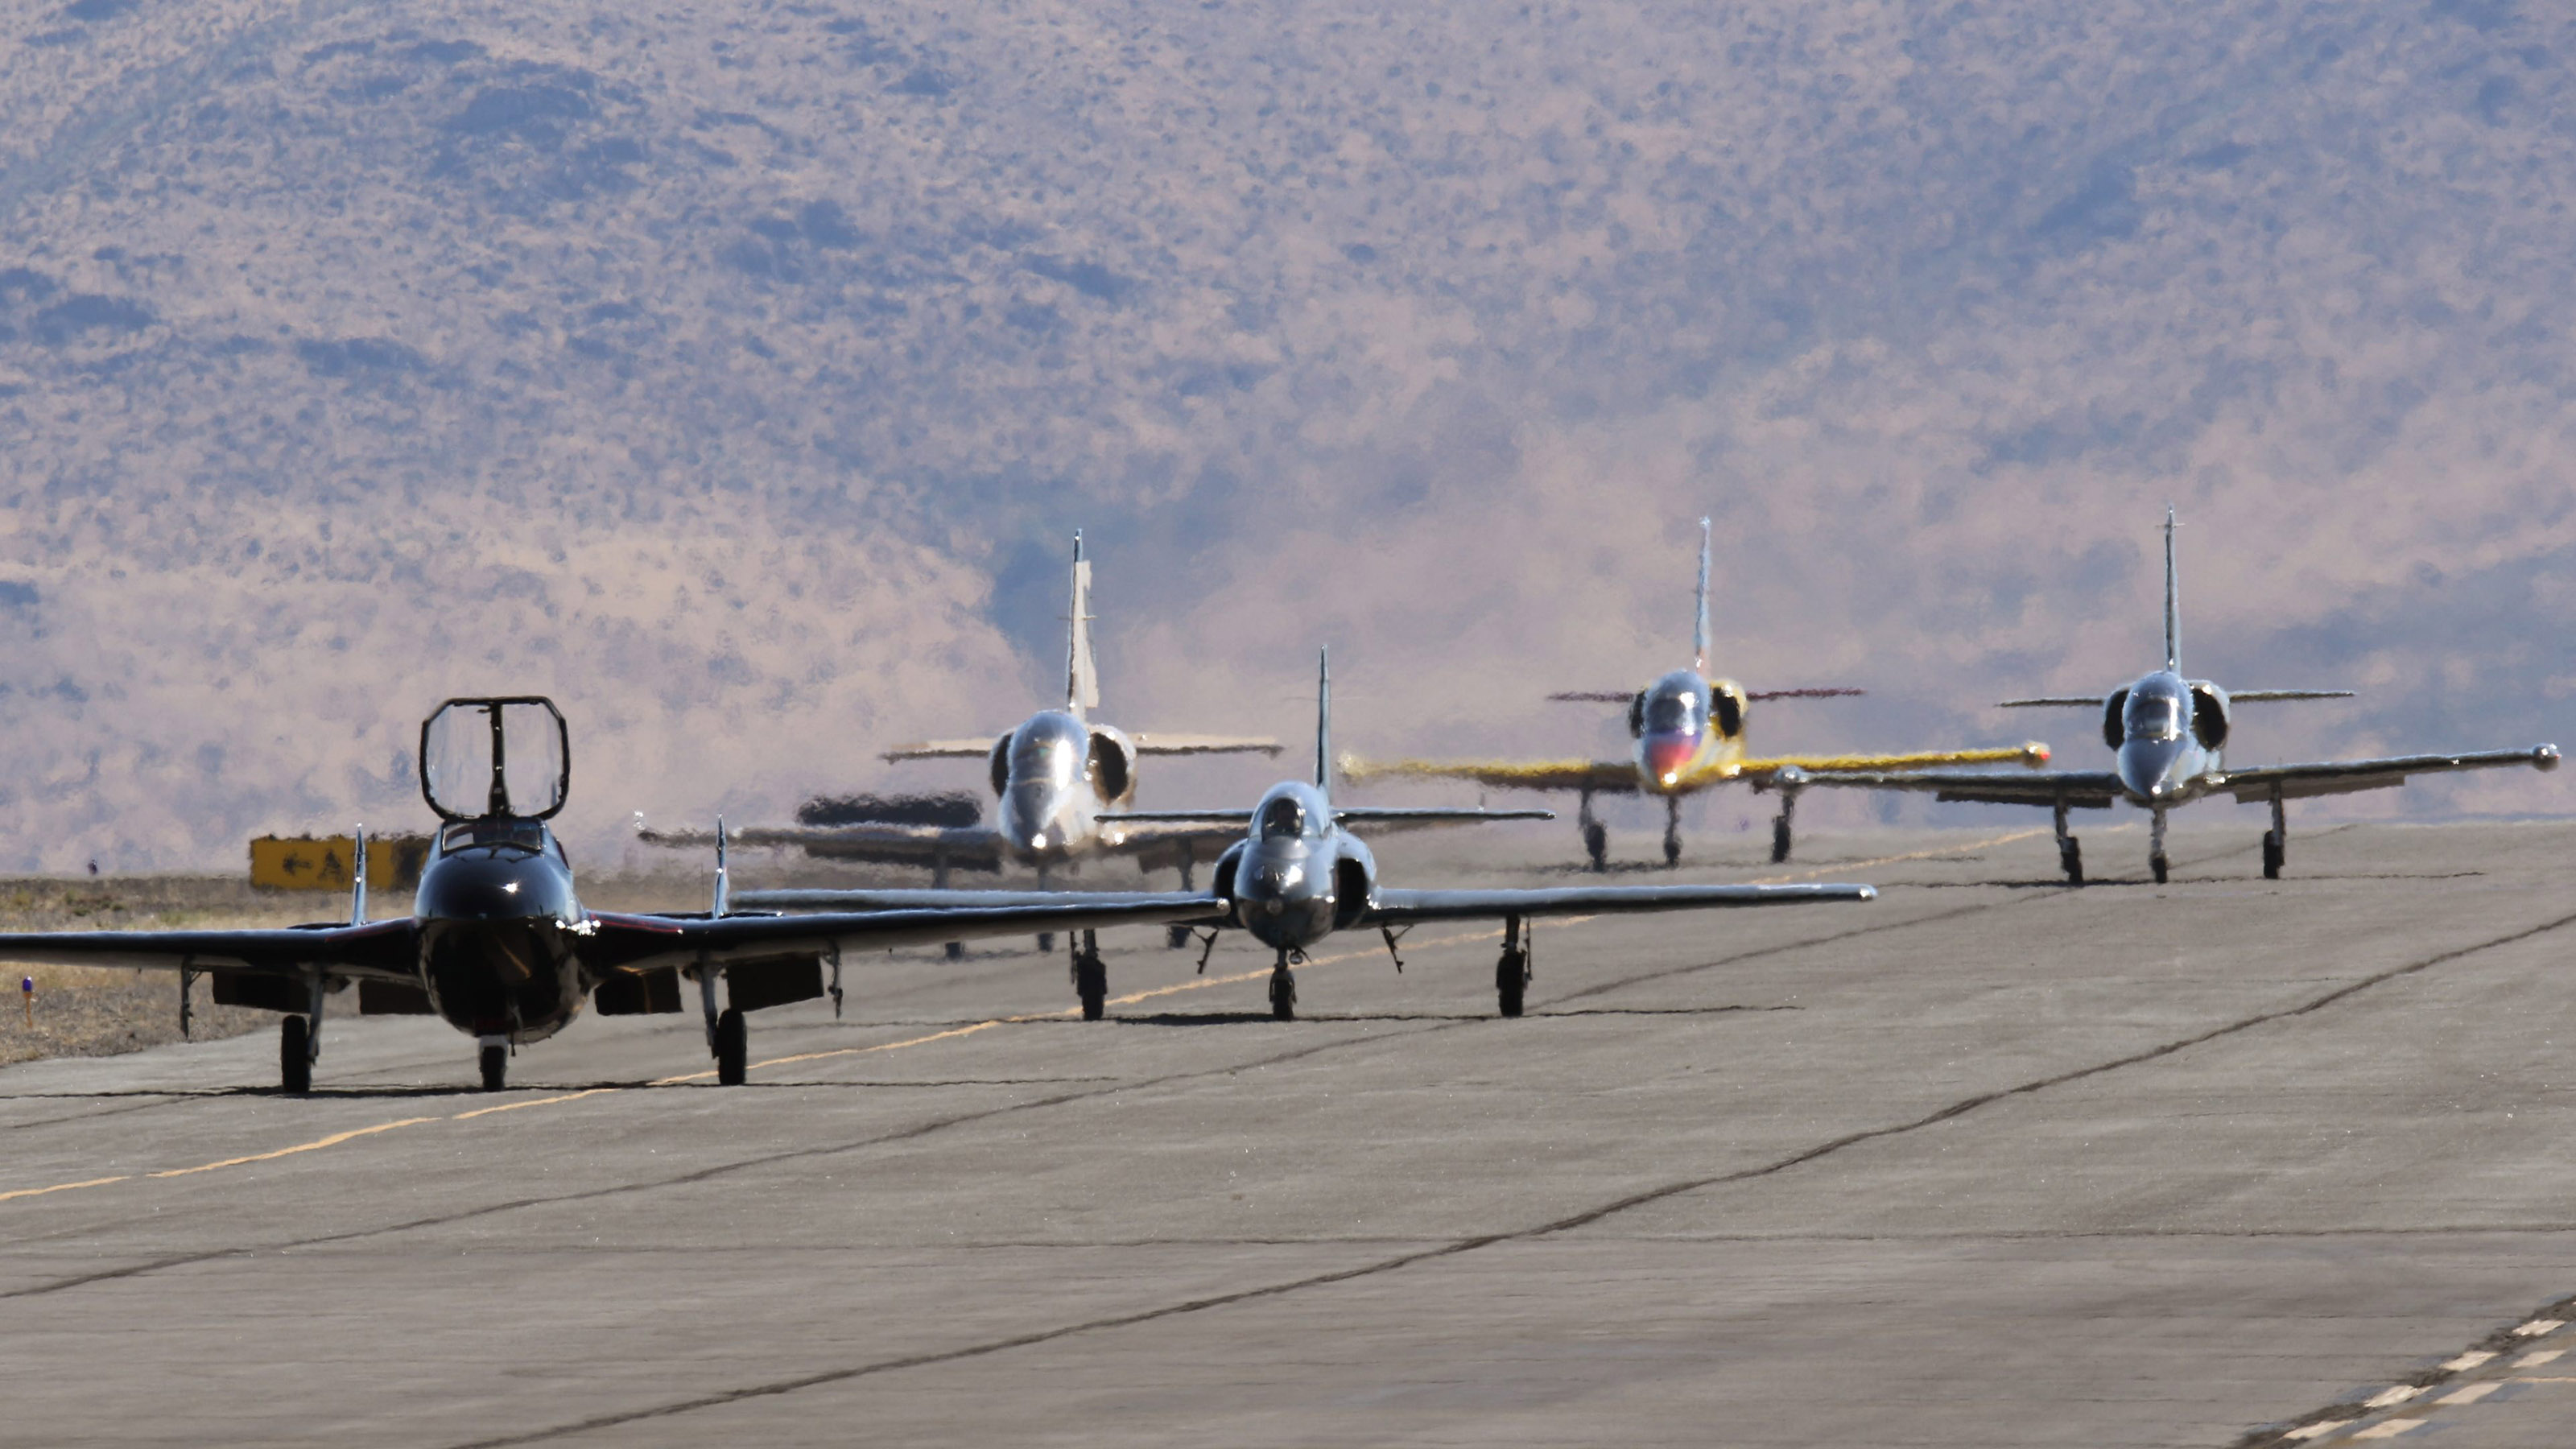 Racers in the Jet Class taxi for a practice heat during the 2017 National Championship Air Races in Reno. Photo by Robert Fisher.